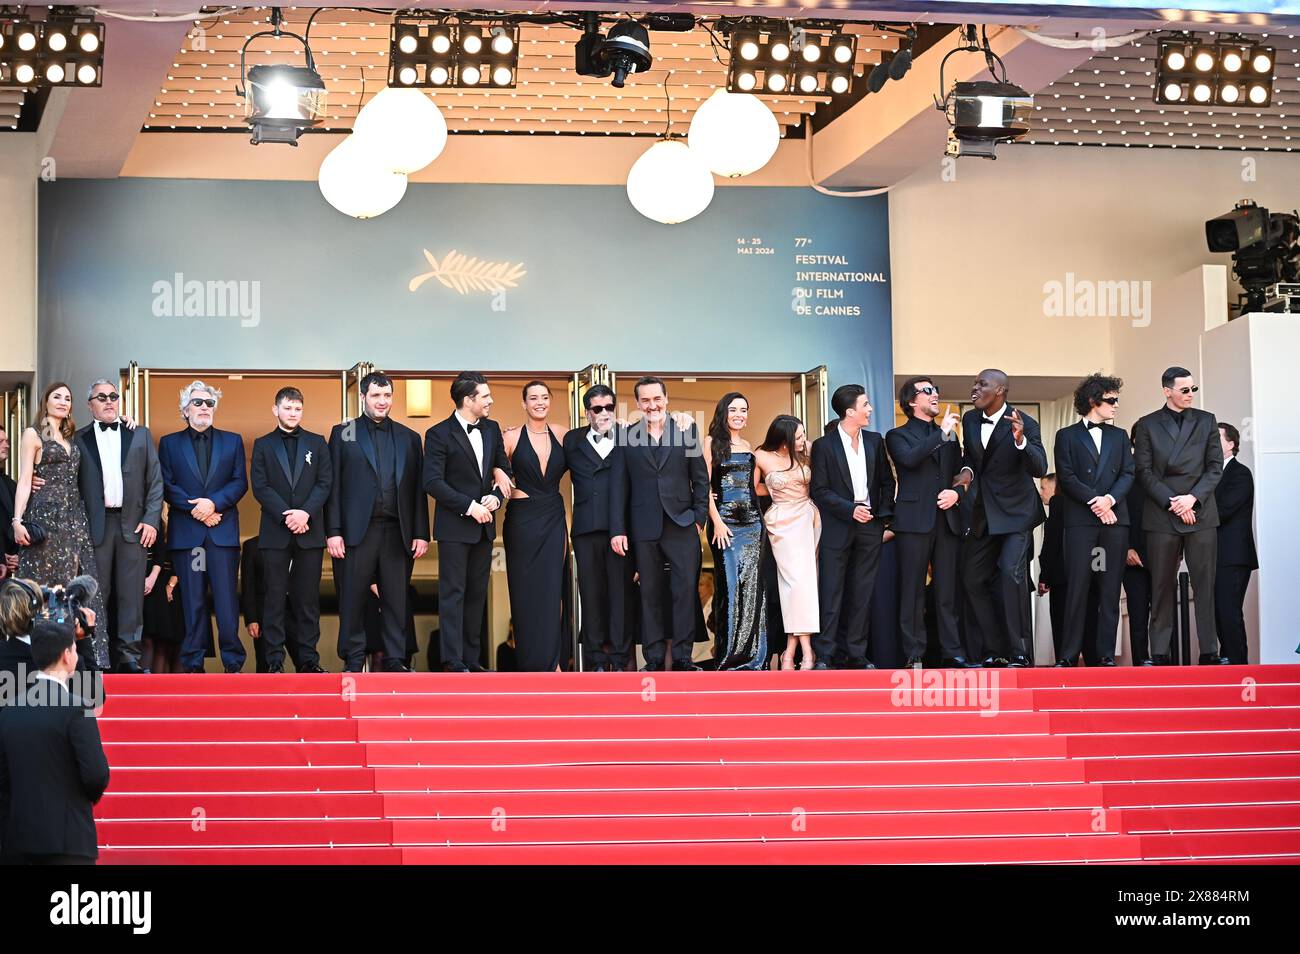 The President of the Jury International Critics' Week, Audrey Diwan, along with Ahmed Hamidi, Alain Chabat, Anthony Bajon, Karim Laklou, Francois Civil, Adele Exarchopoulos, Alain Attal, Gilles Lellouche, Elodie Bouchez, Mallory Wanecque, Malik Frikah, Producer Hugo Selignac, Jean-Pascal Zadi, Vincent Lacoste, and Raphael Quenard, are attending the ''L'Amour Ouf'' (Beating Hearts) Red Carpet at the 77th annual Cannes Film Festival at Palais des Festivals in Cannes, France, on May 23, 2024. (Photo by Stefanos Kyriazis/NurPhoto) Stock Photo